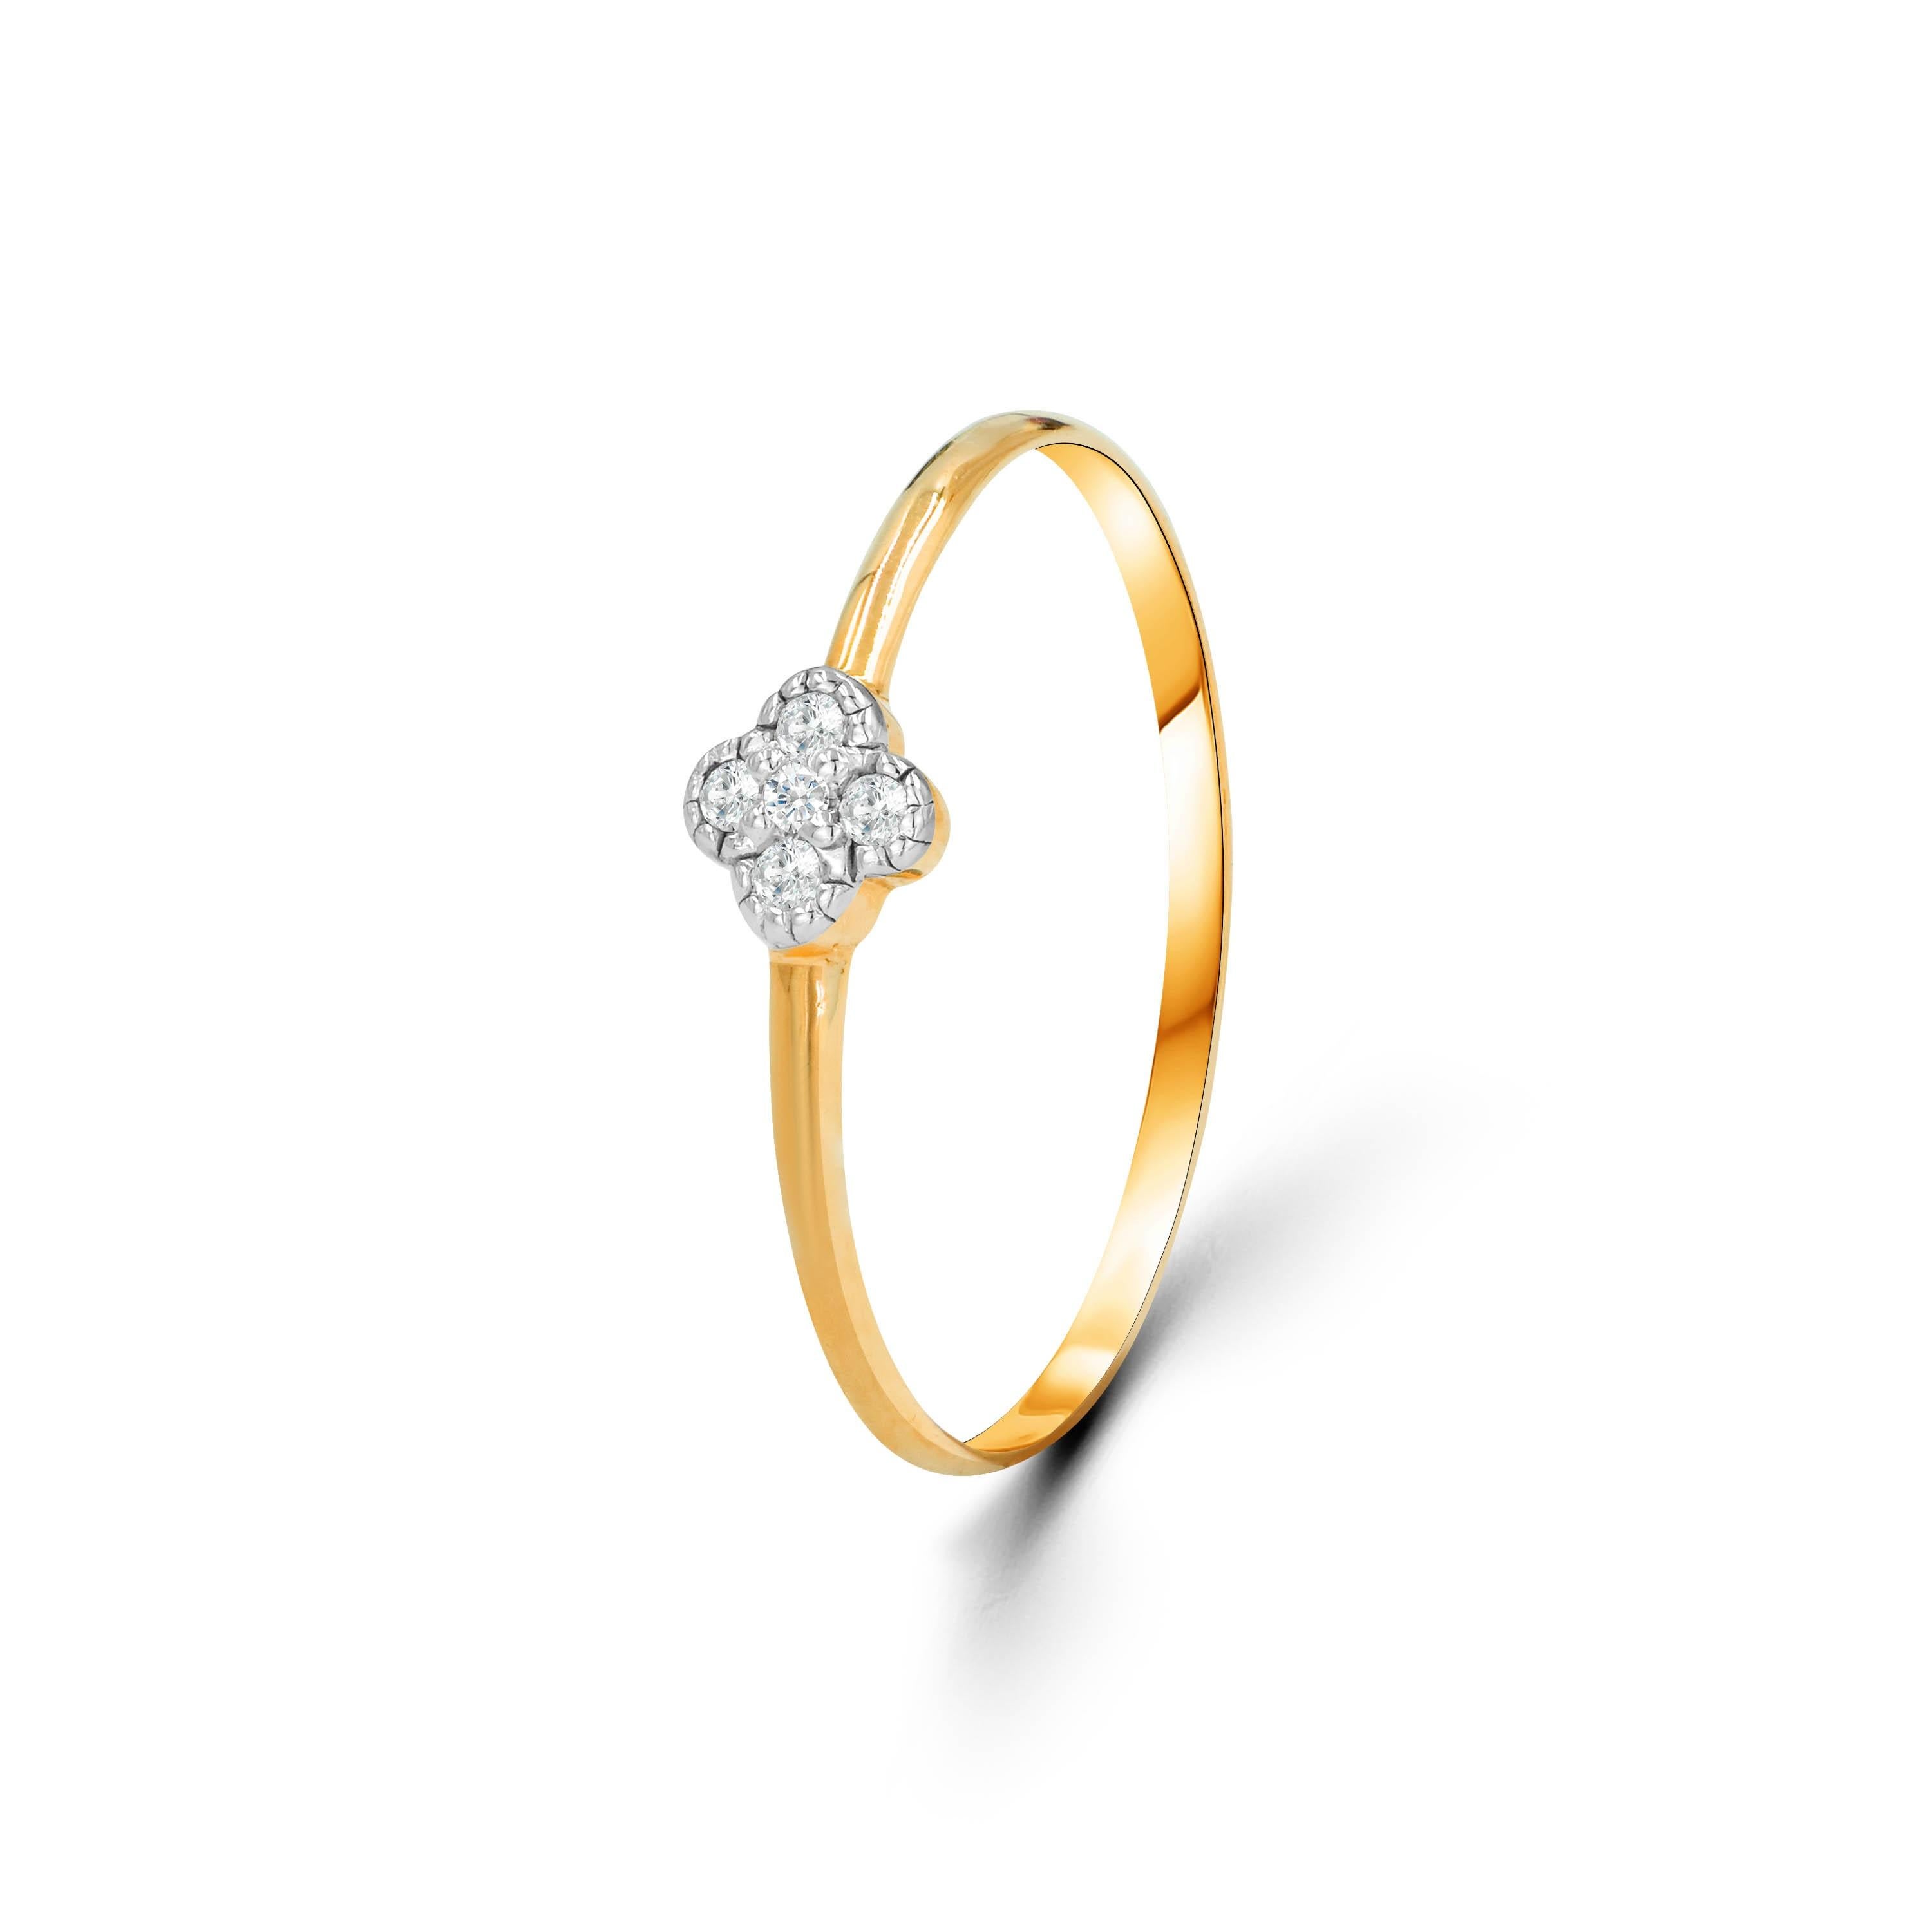 For Sale:  18k Gold Clover Ring Dainty Minimalist Diamond Ring Stackable Ring 2